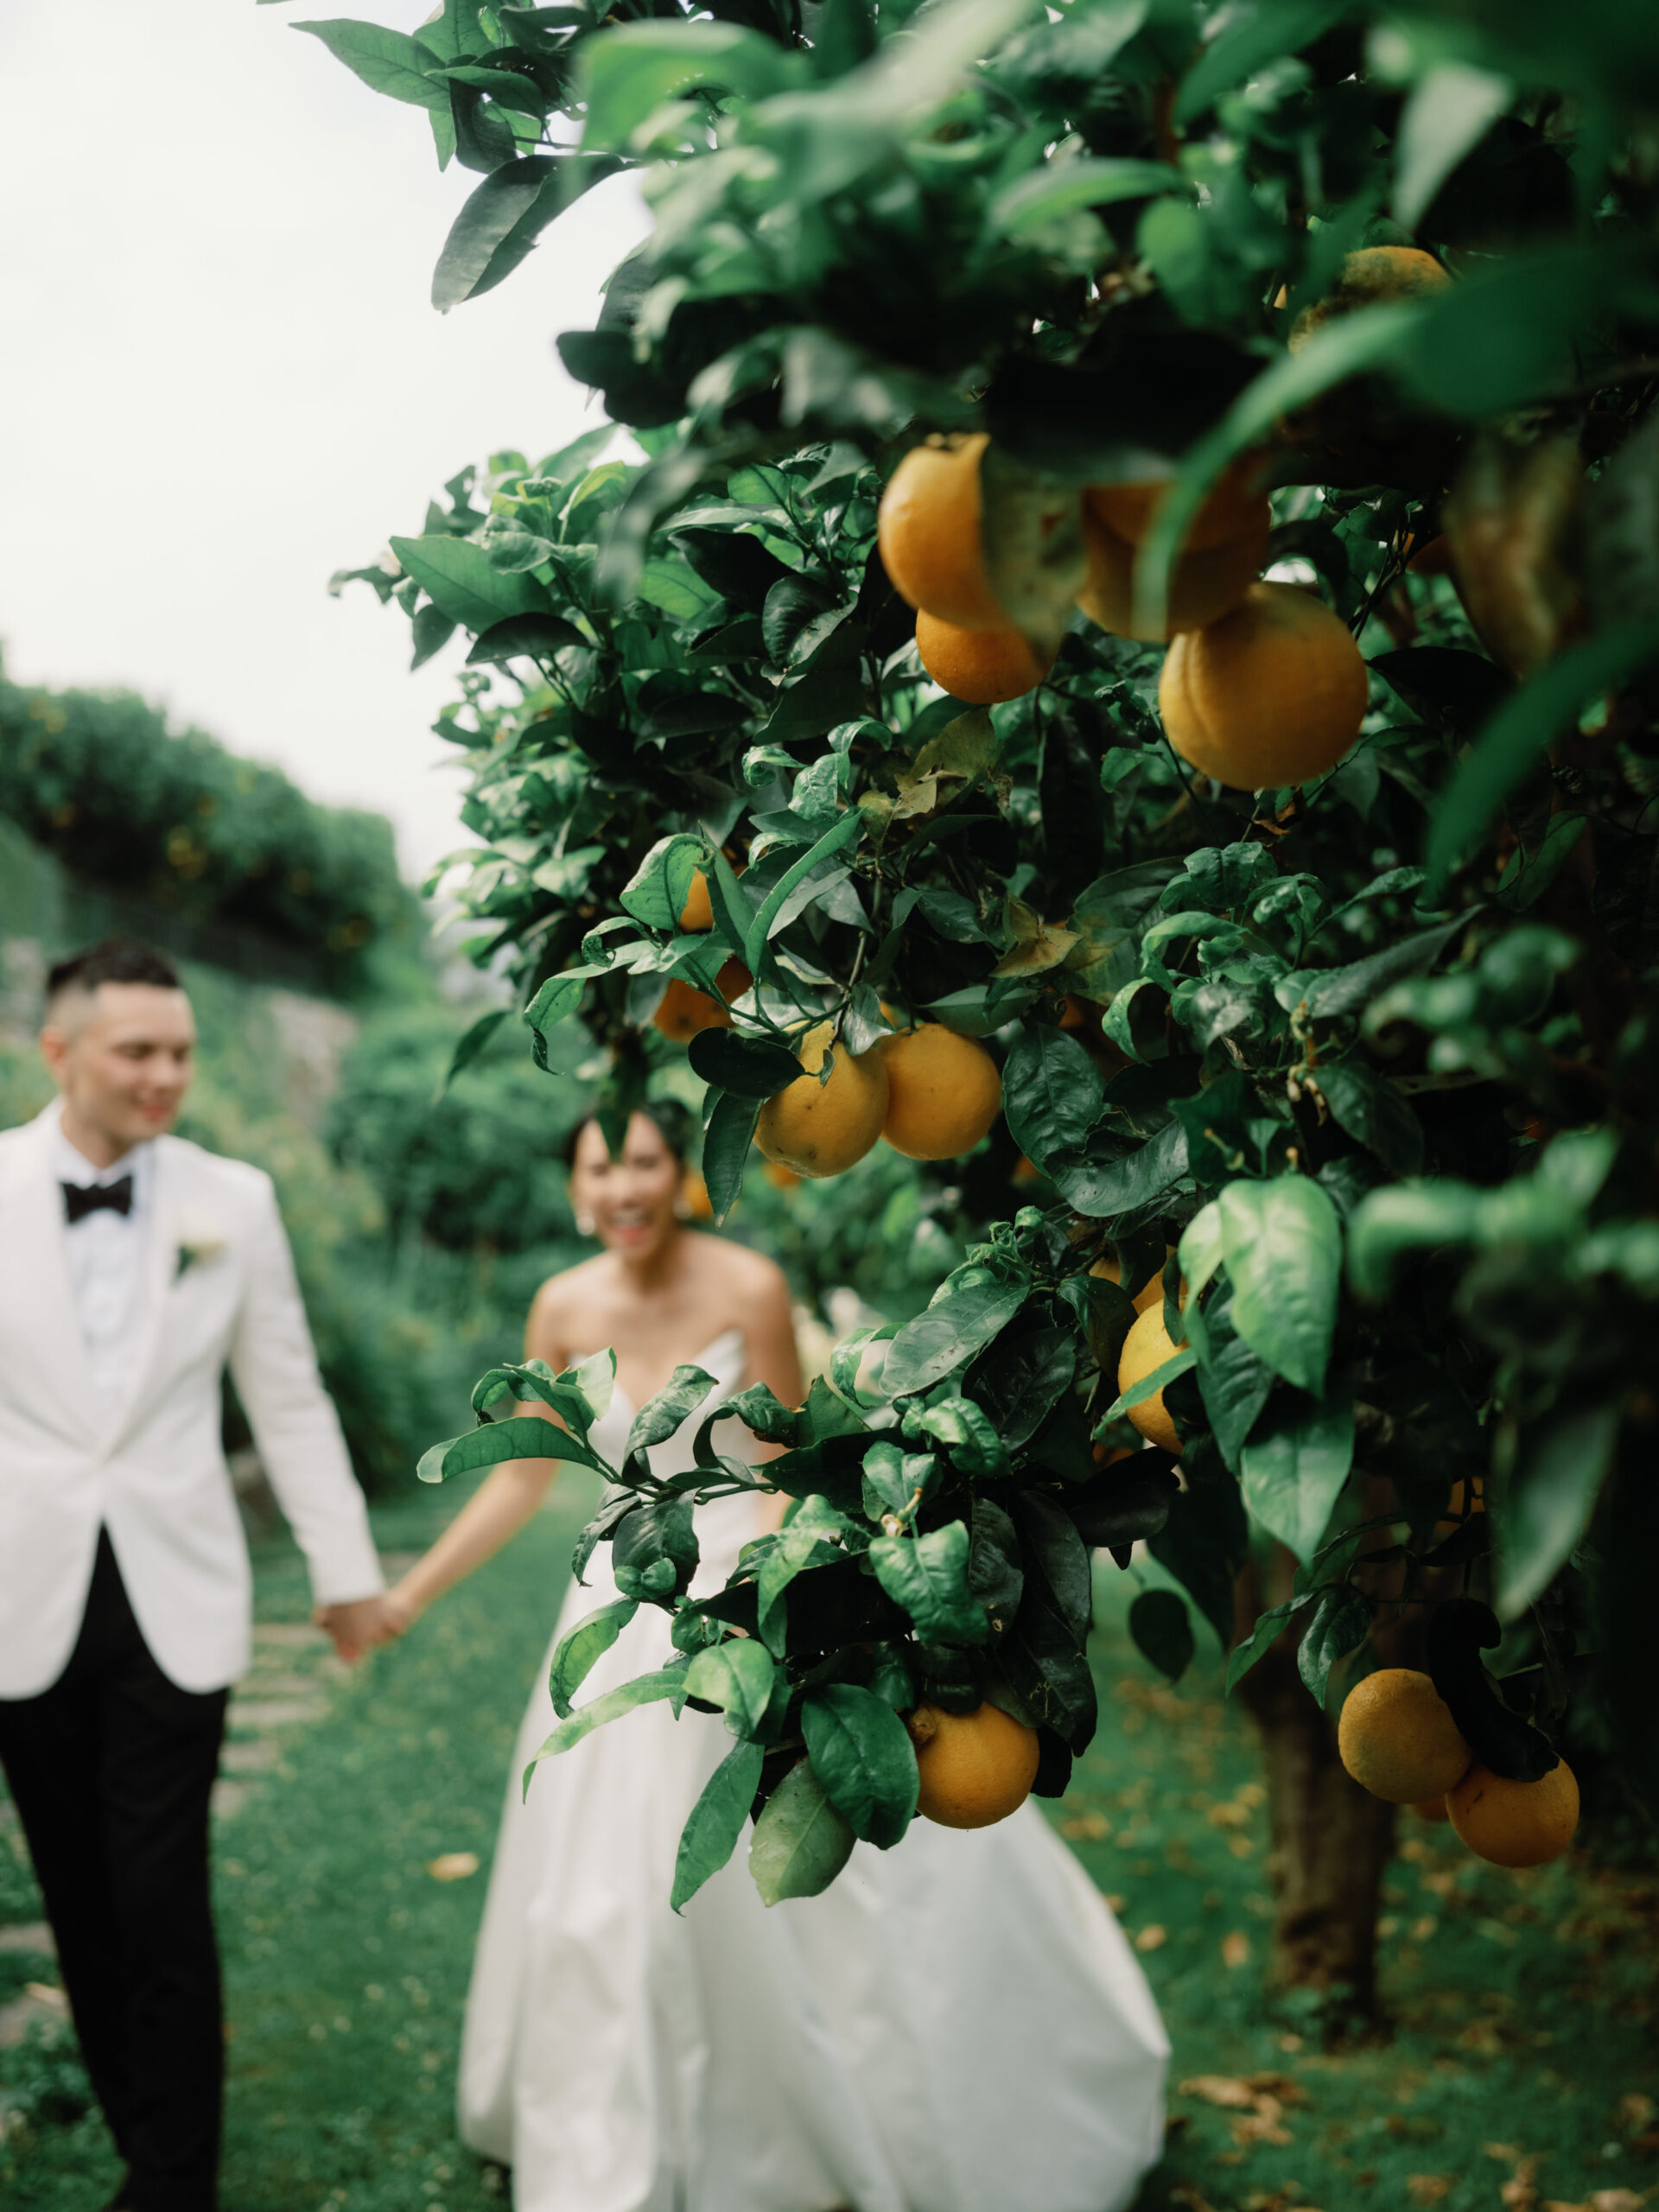 Editorial photo of the newlyweds in a garden in Amalfi Coast, Italy. Image by Jenny Fu Studio